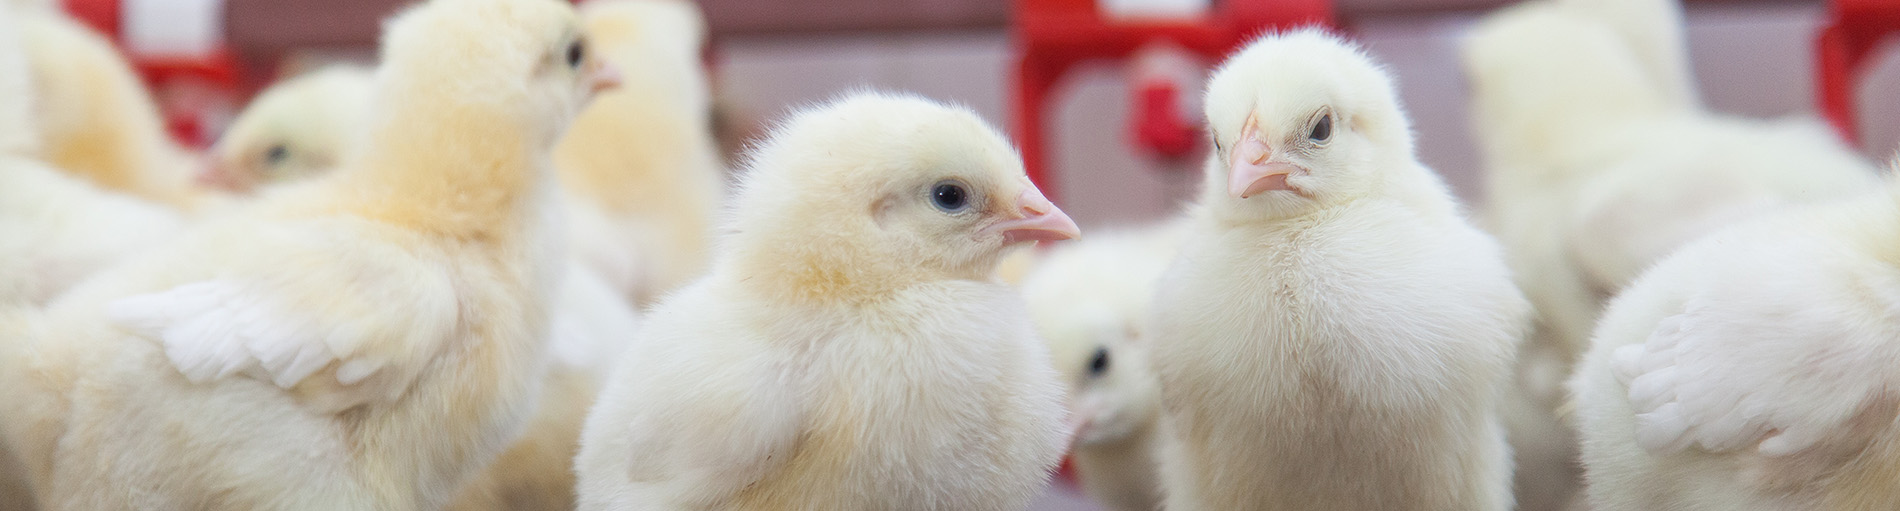 image of baby chicks